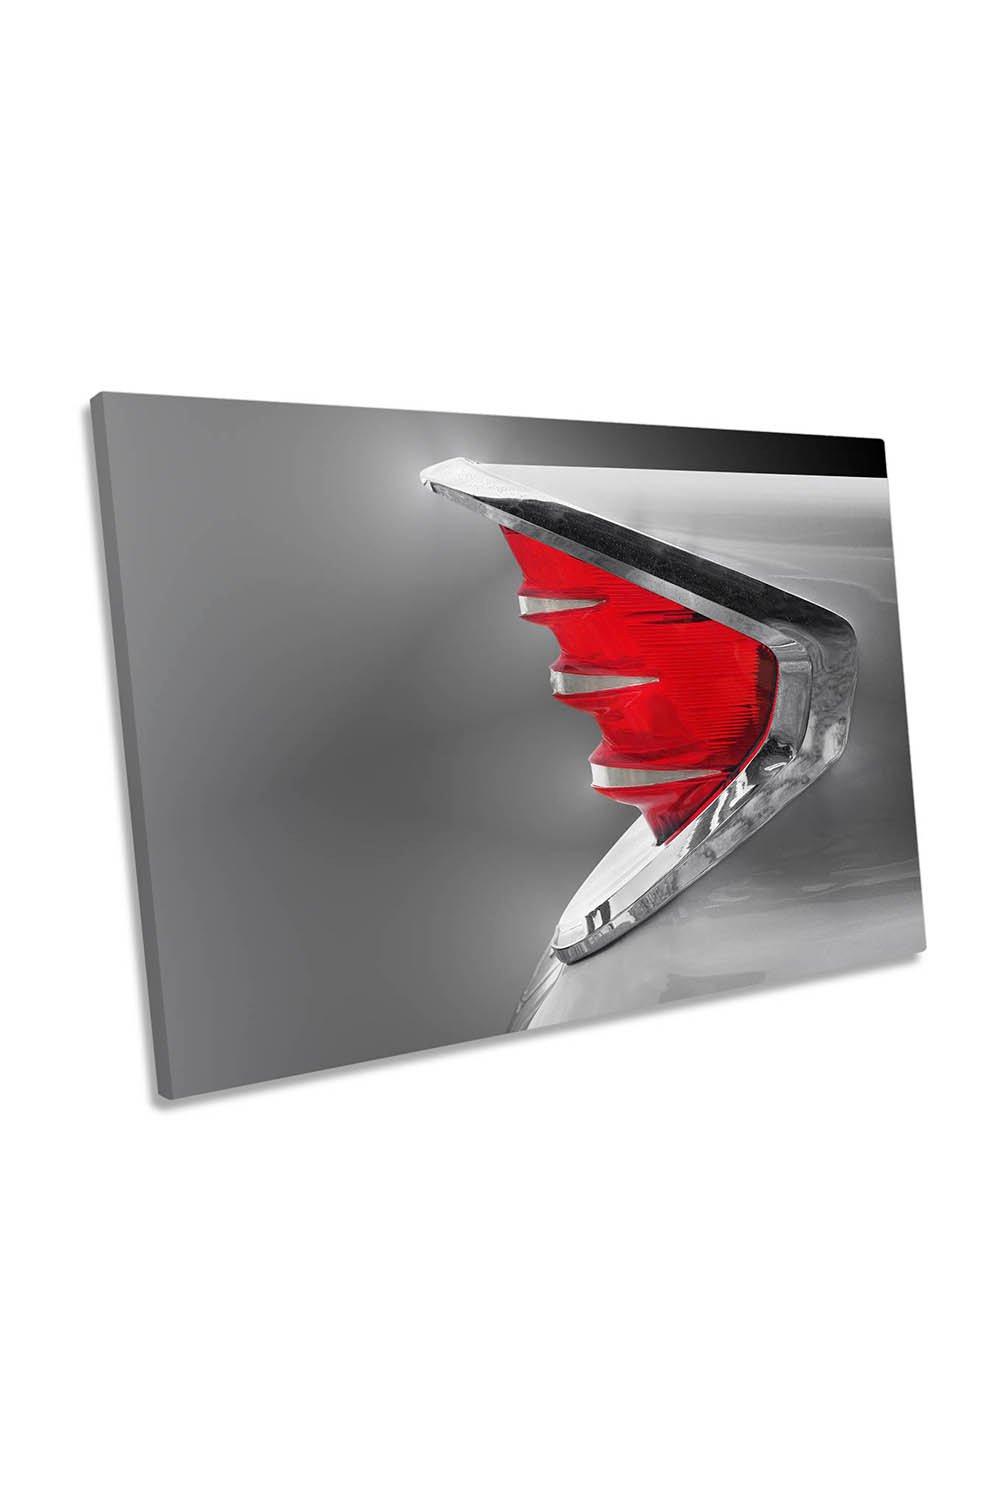 US classic Car 1960 Fire Flite Tail Fin Grey Canvas Wall Art Picture Print